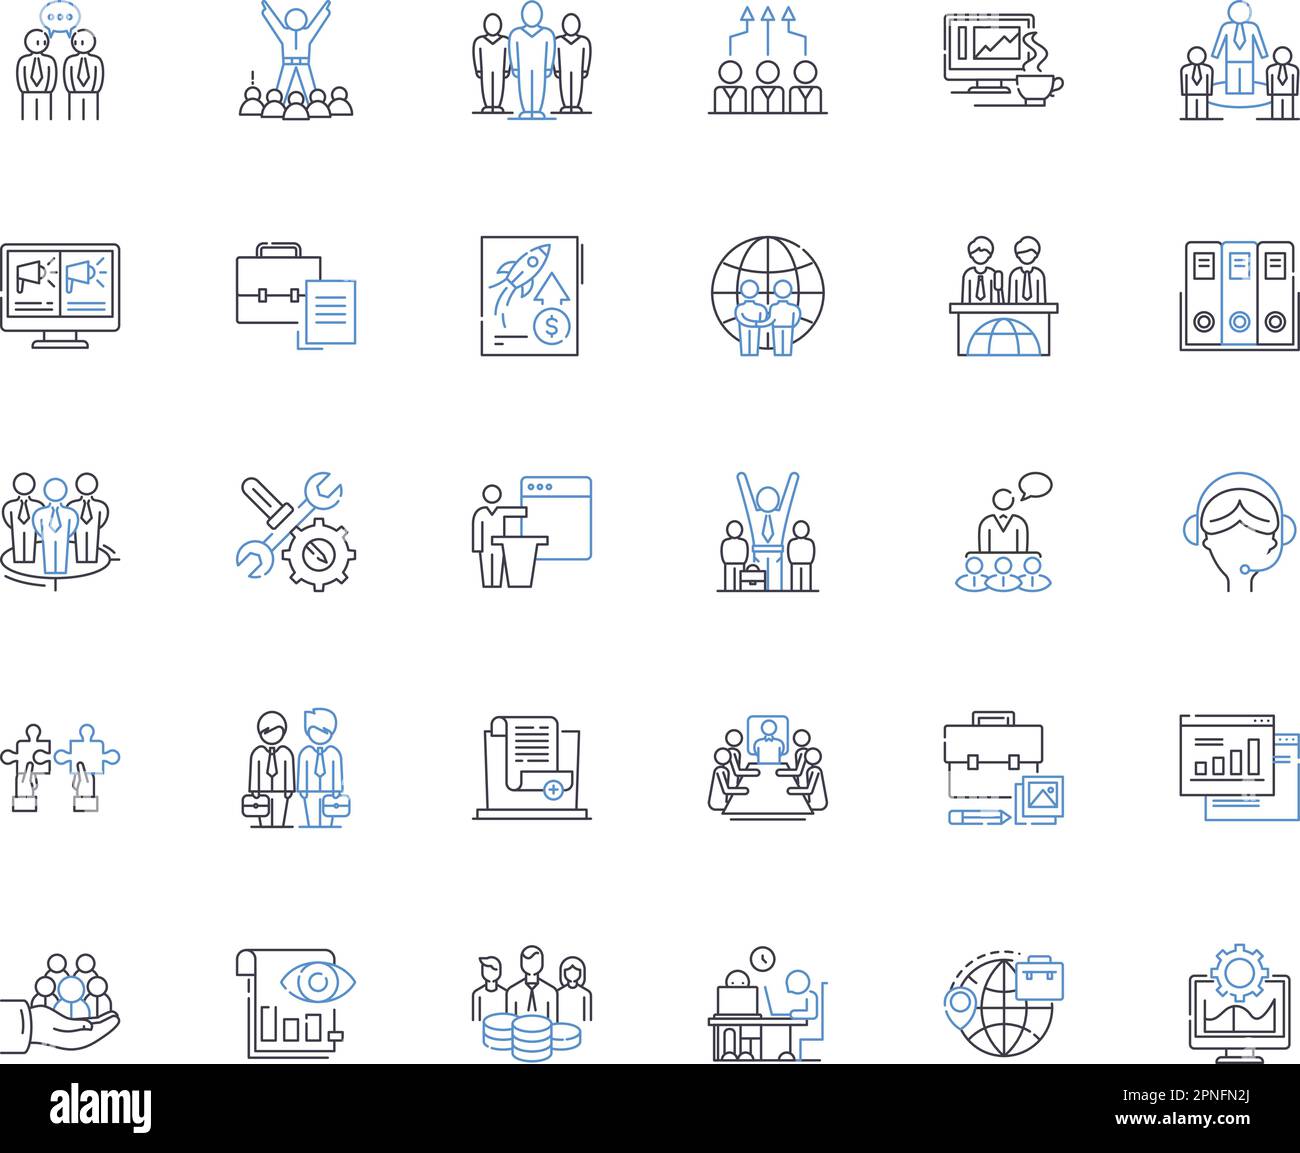 Service provider line icons collection. Professionalism, Experience, Reliability, Quality, Efficiency, Affordability, Reputation vector and linear Stock Vector